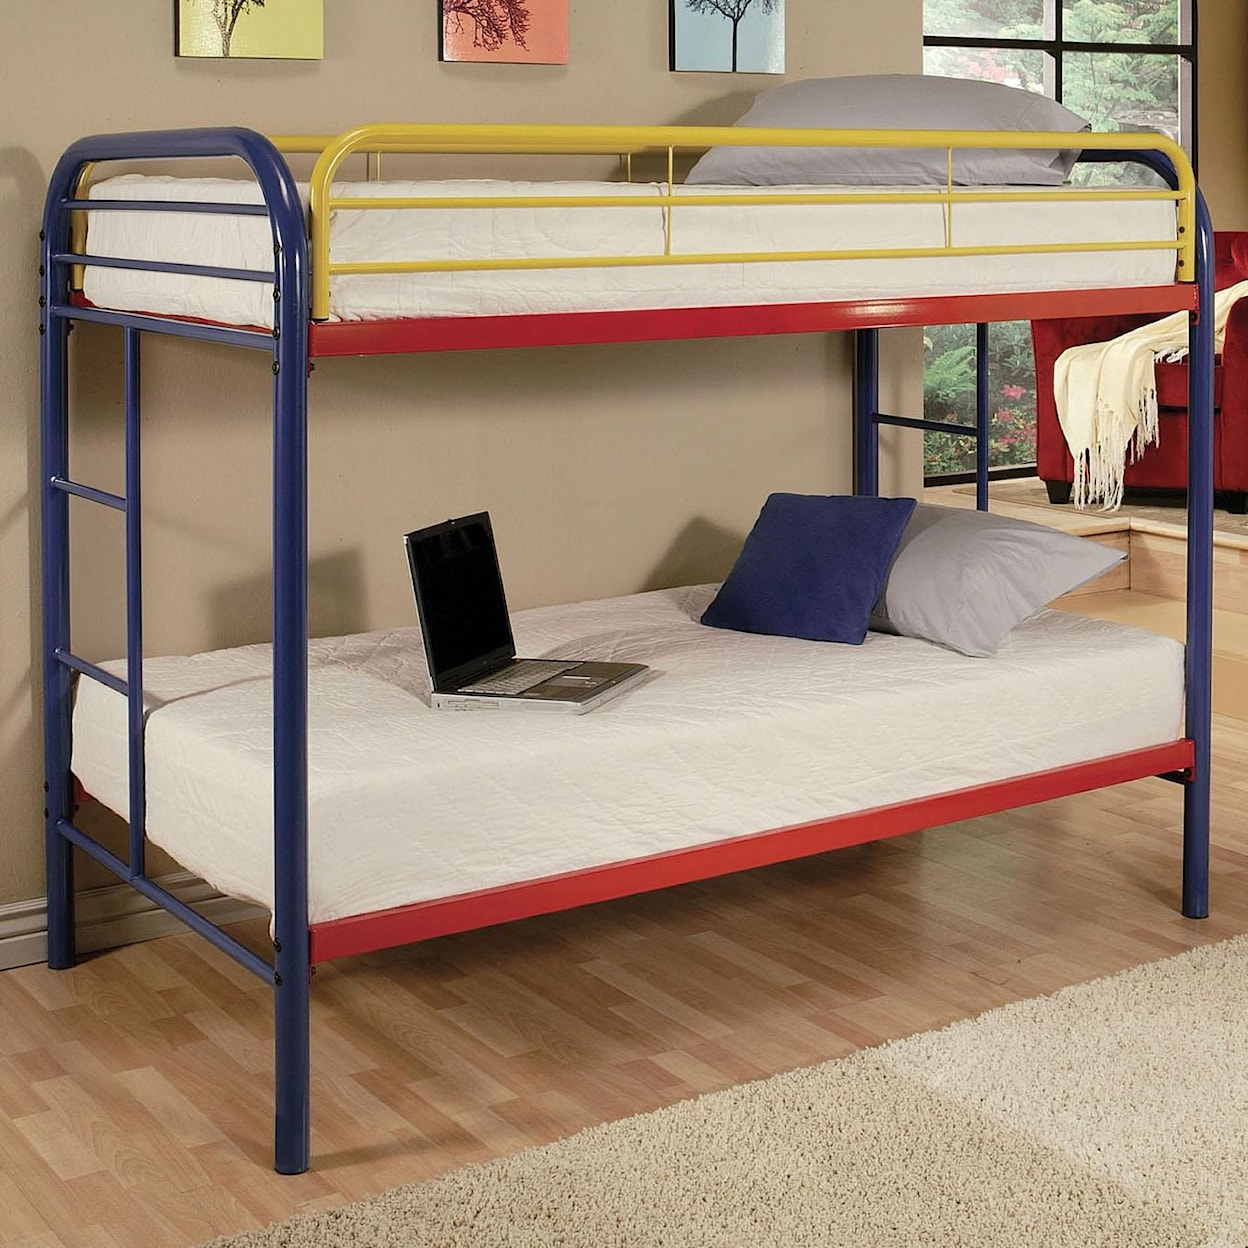 Acme Furniture Youth Bunk Beds Twin/Twin Bunk Bed